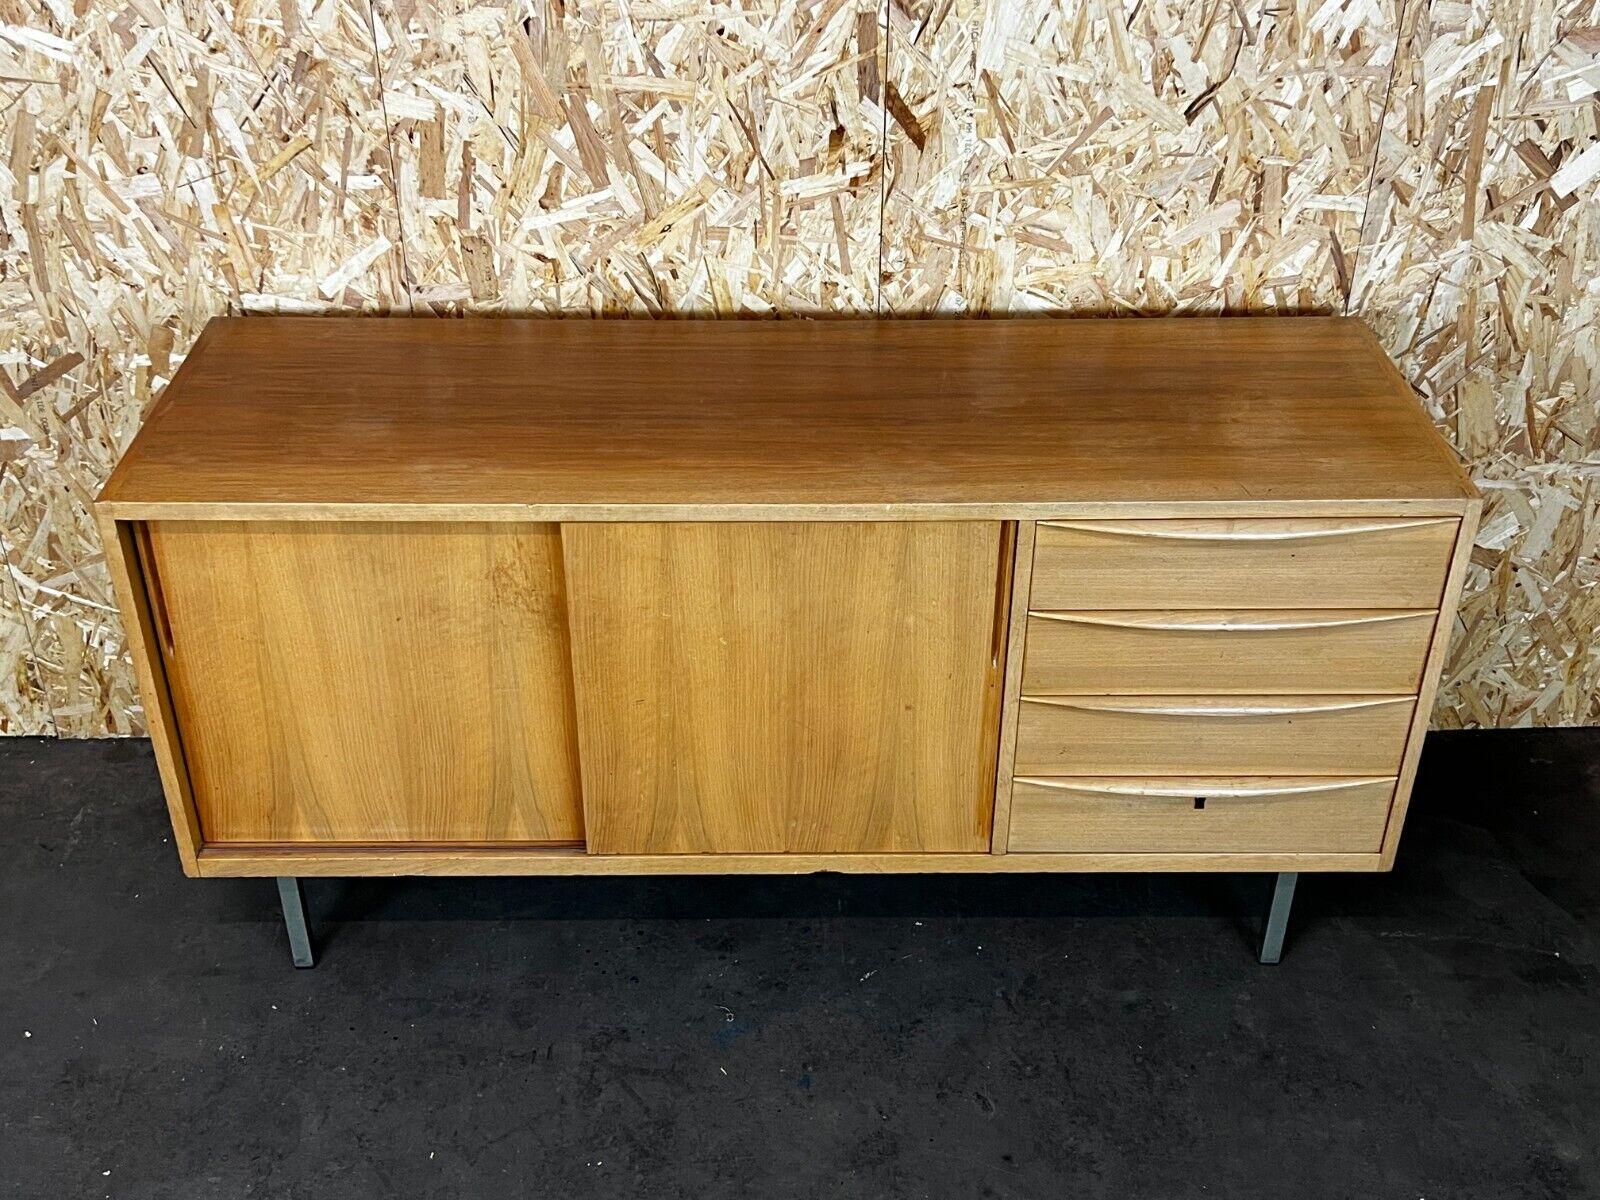 70s style sideboard